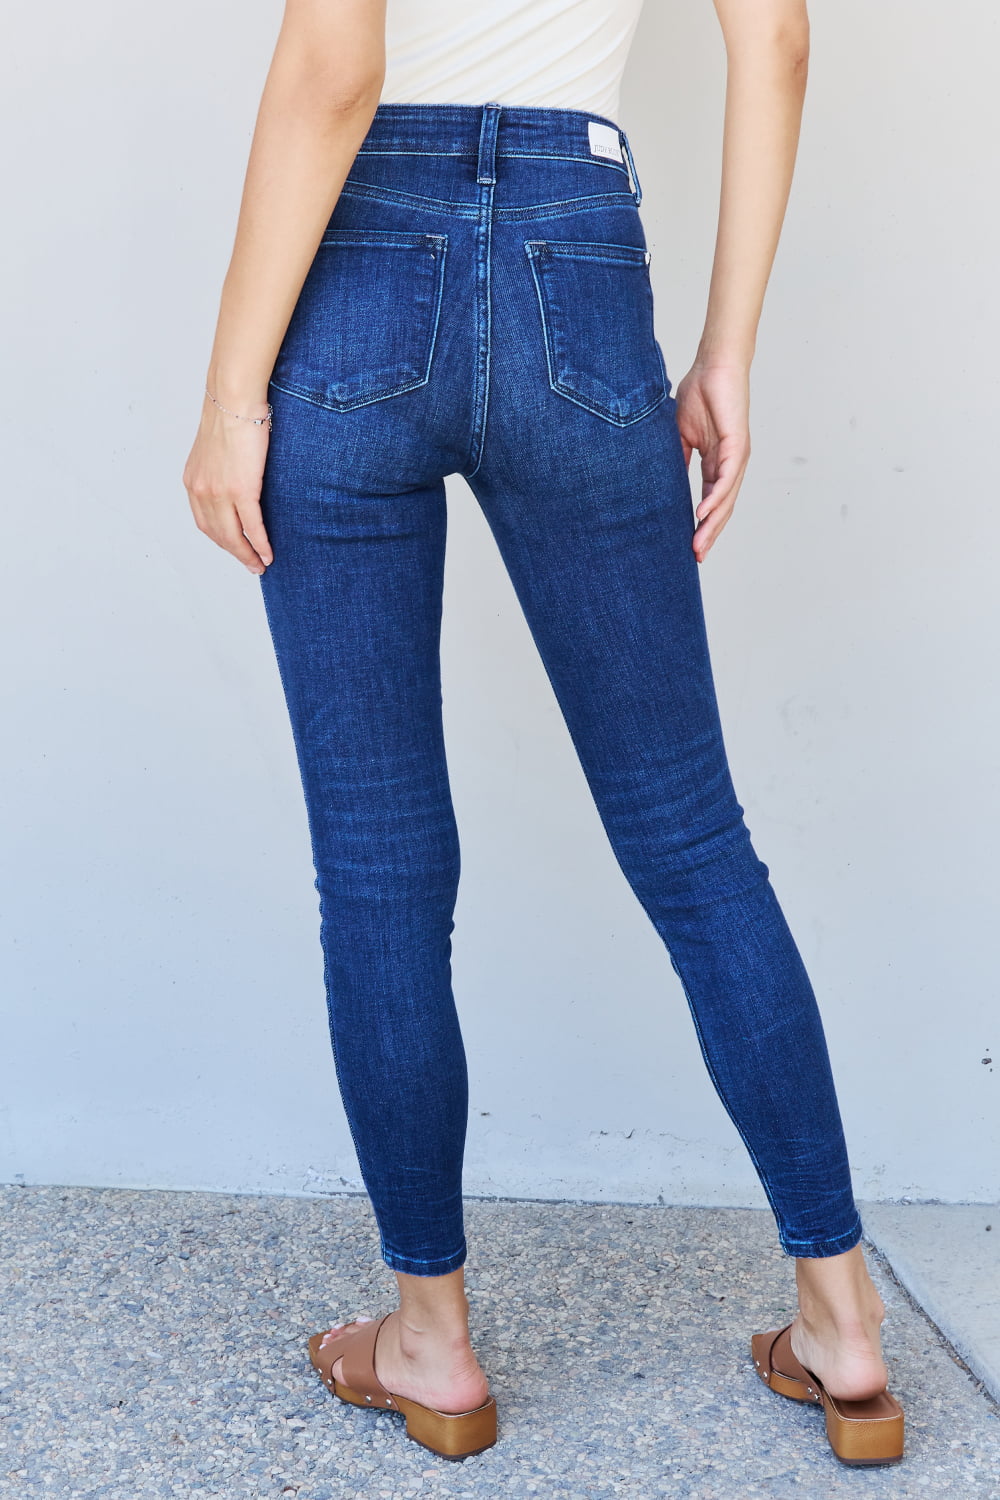 A woman stepping into effortless edge with Judy Blue Marie Full Size Mid Rise Crinkle Ankle Detail Skinny Jeans. The jeans showcase a mid-rise design and crinkle ankle detailing, adding a unique and stylish touch. Made with quality denim, they promise both comfort and durability. 